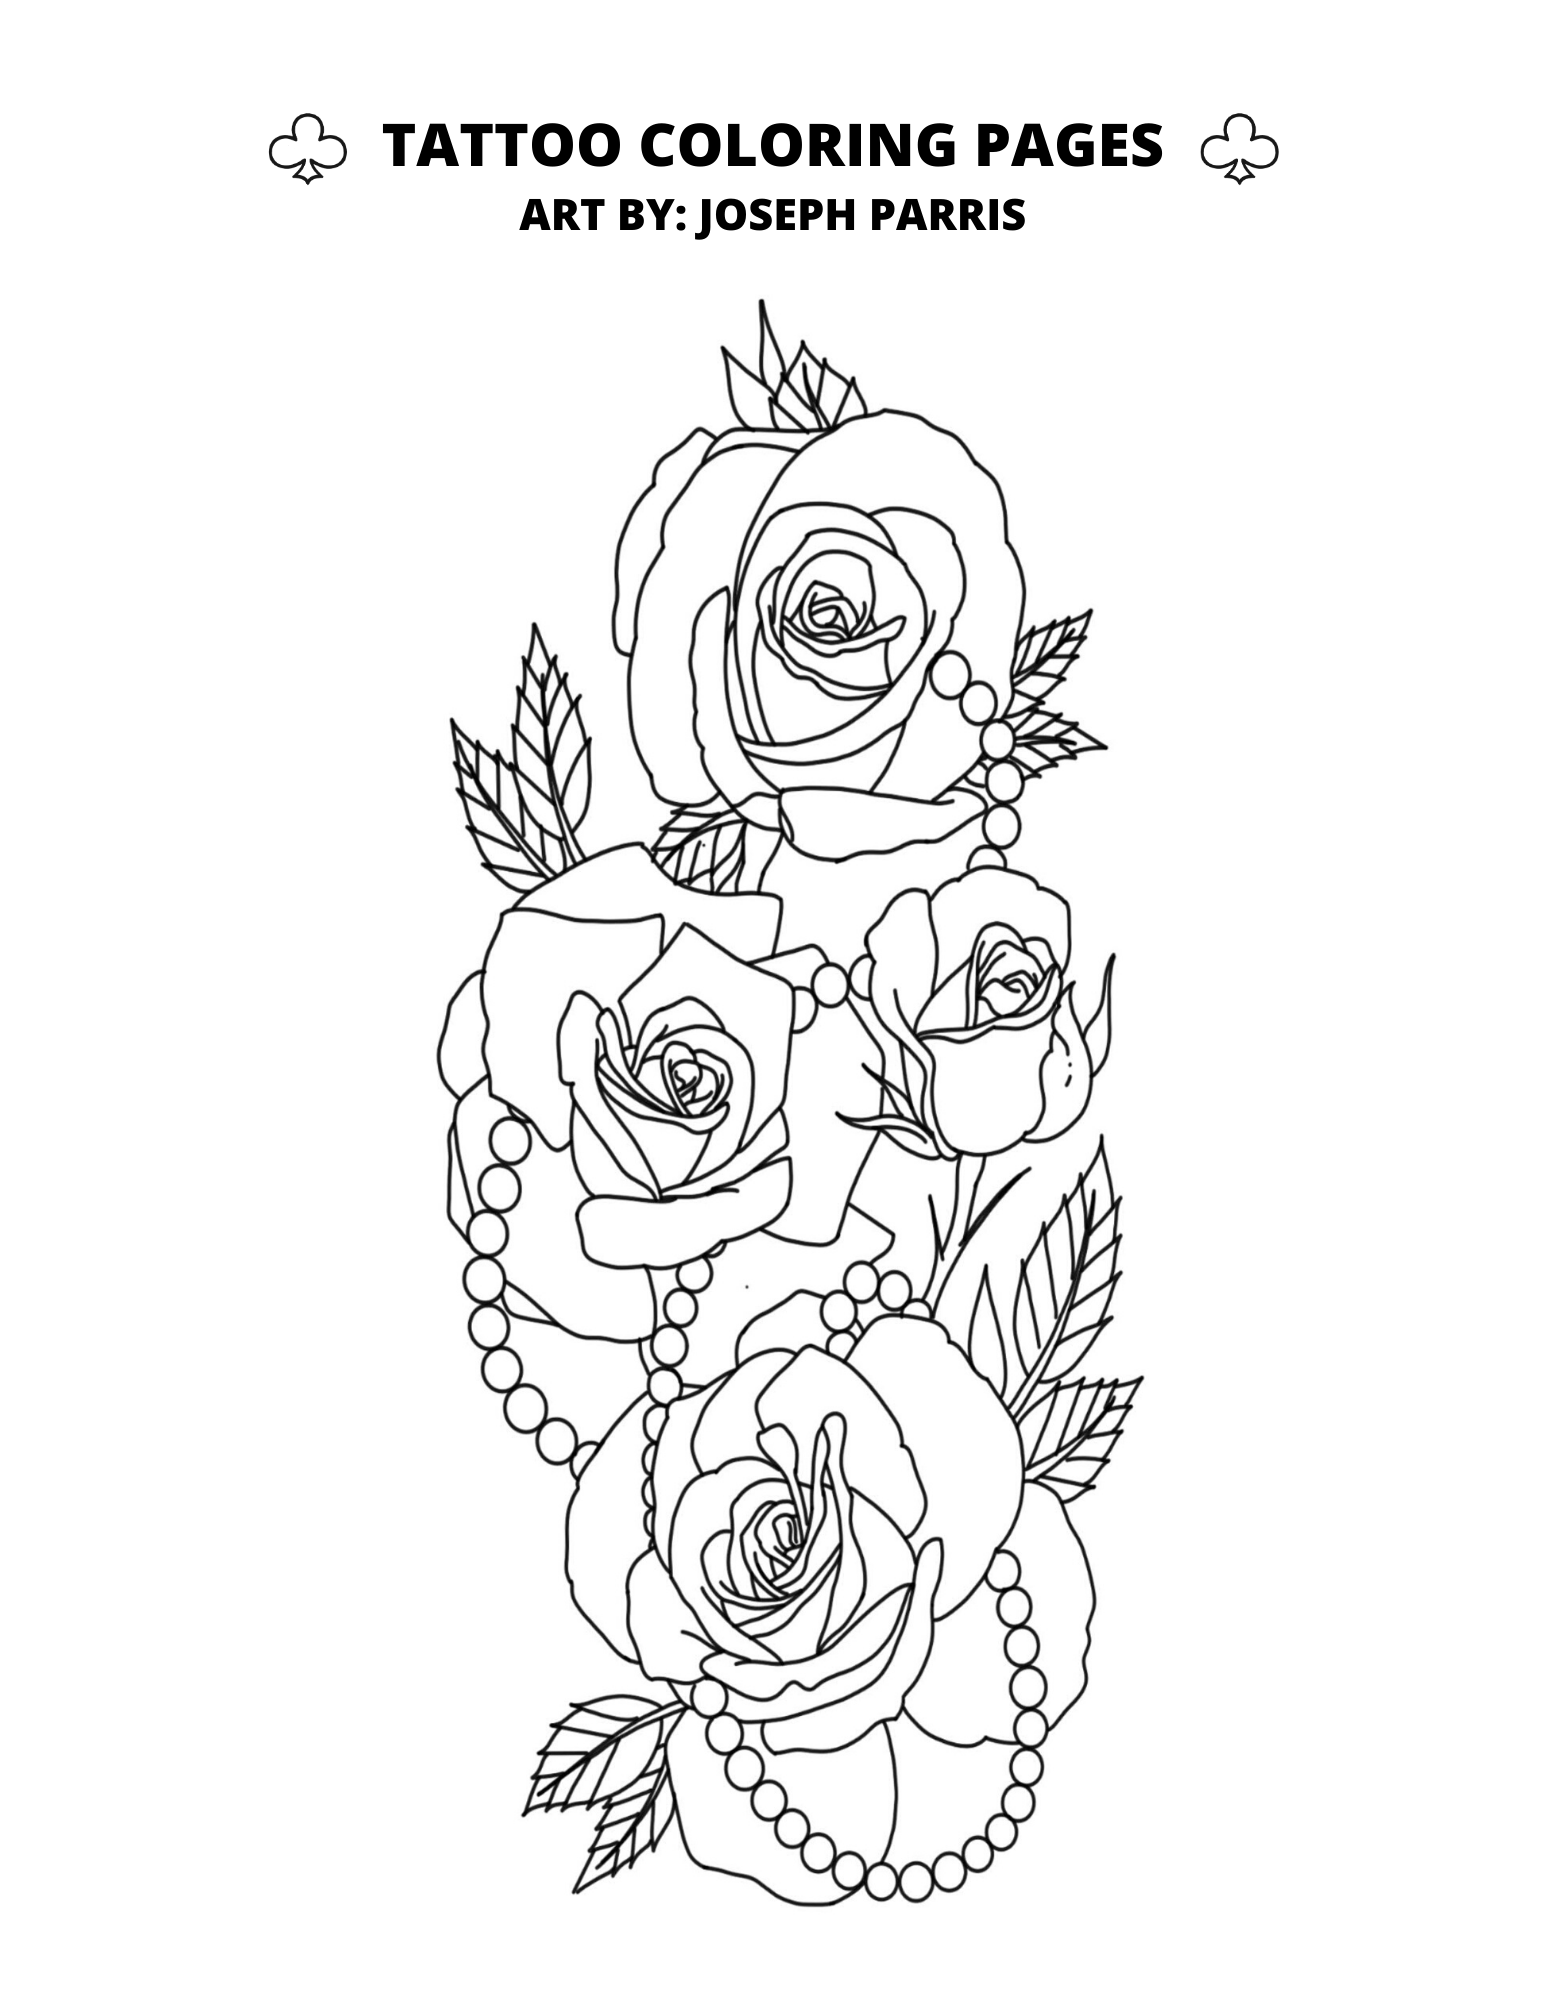 Tattoo coloring pages â club tattoo